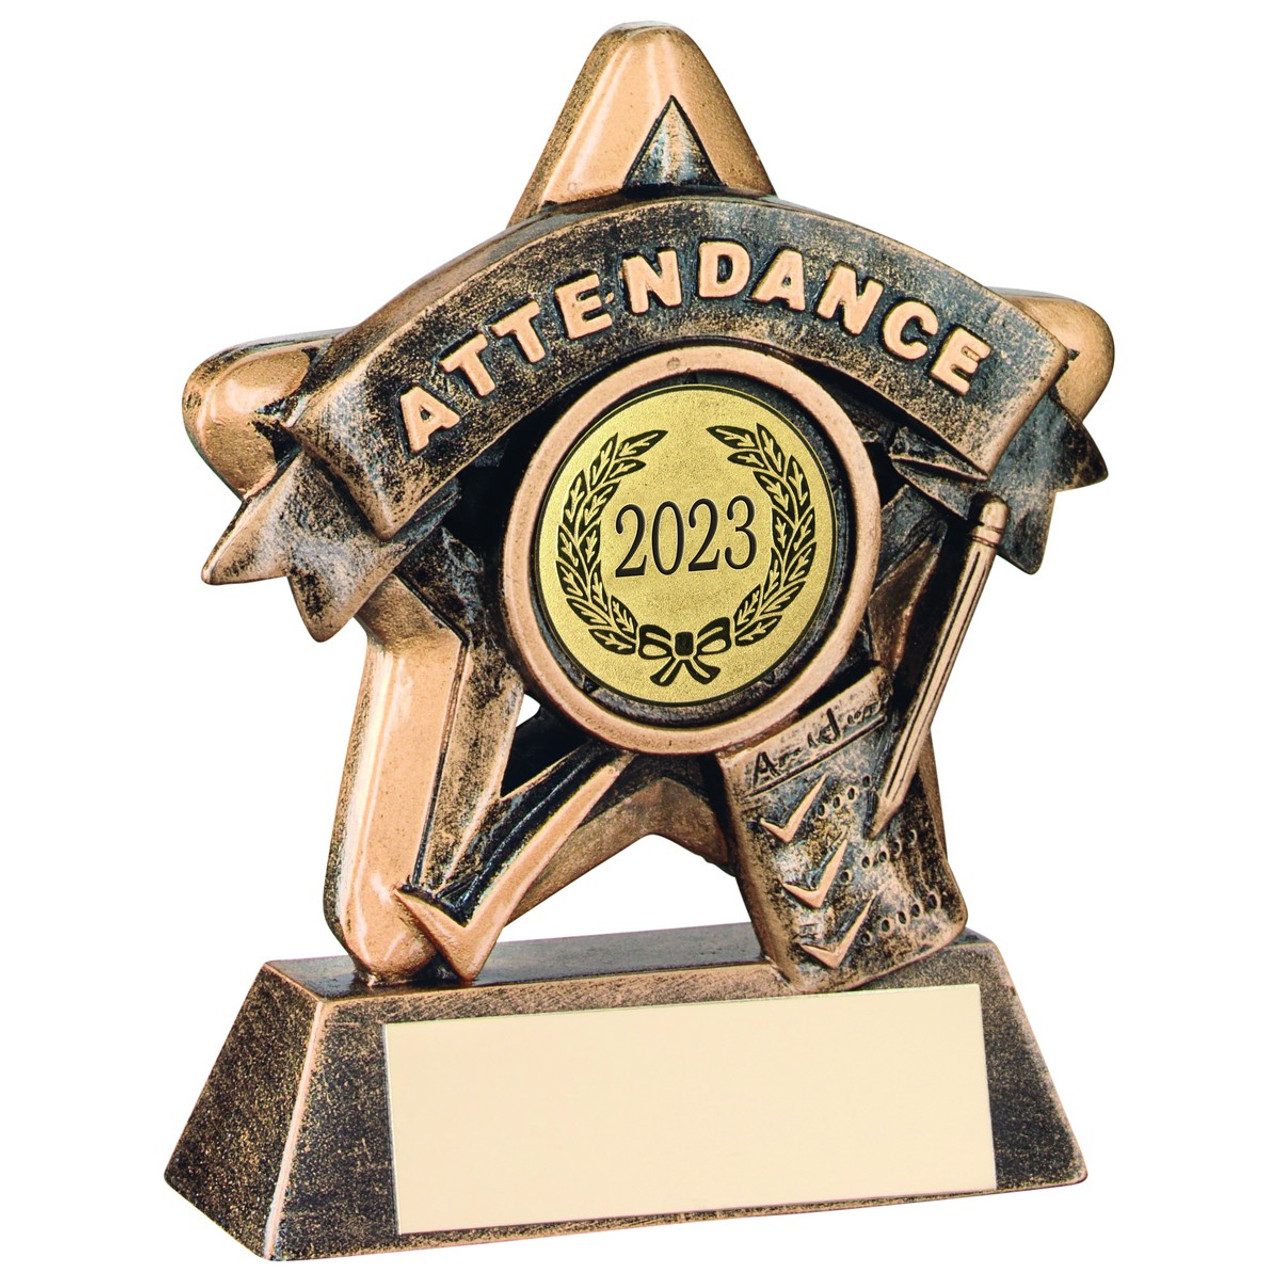 Great value budget School attendance award with FREE engraving.